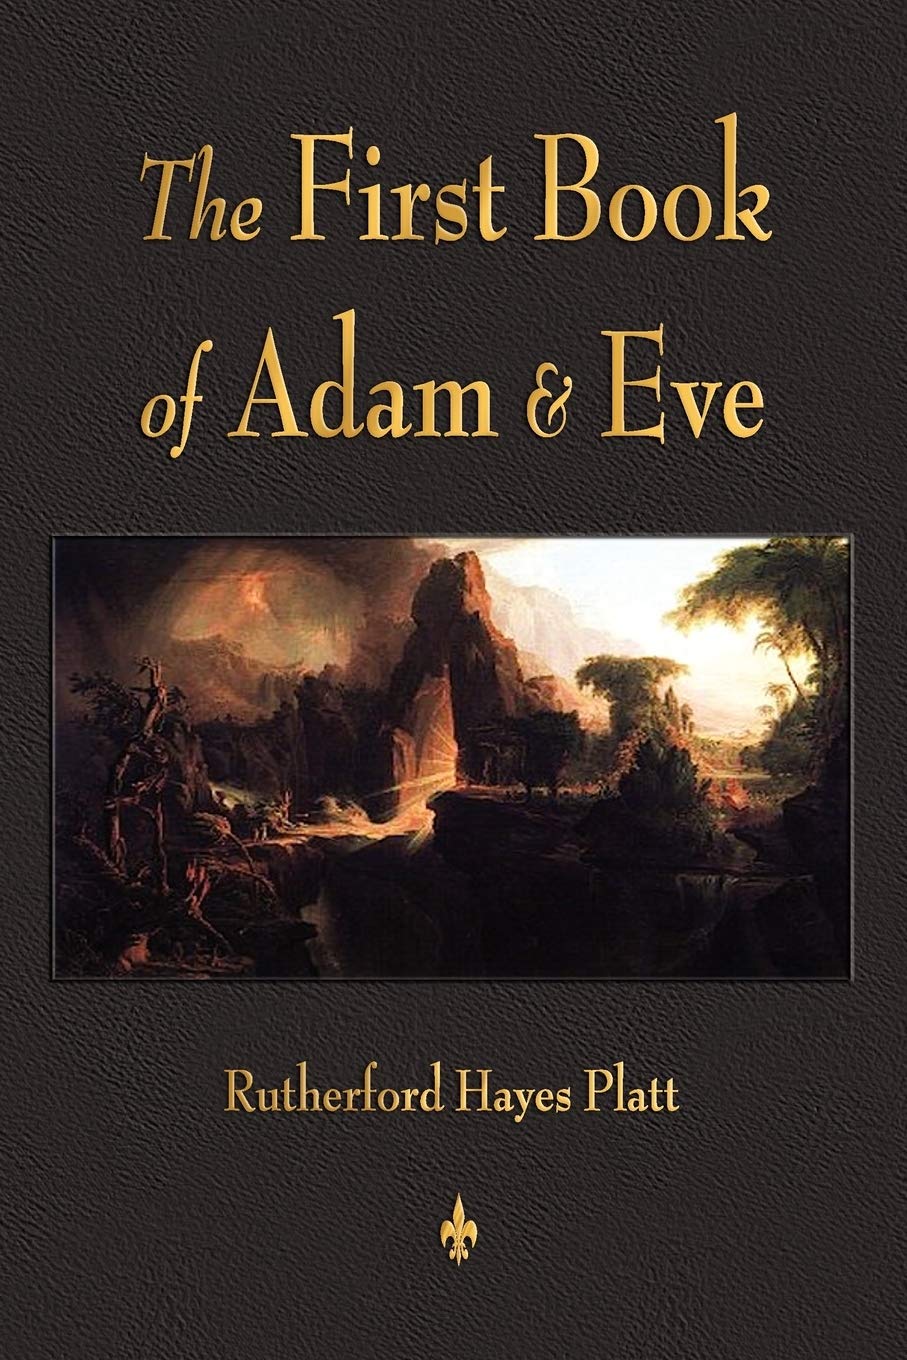 The first book of adam and eve